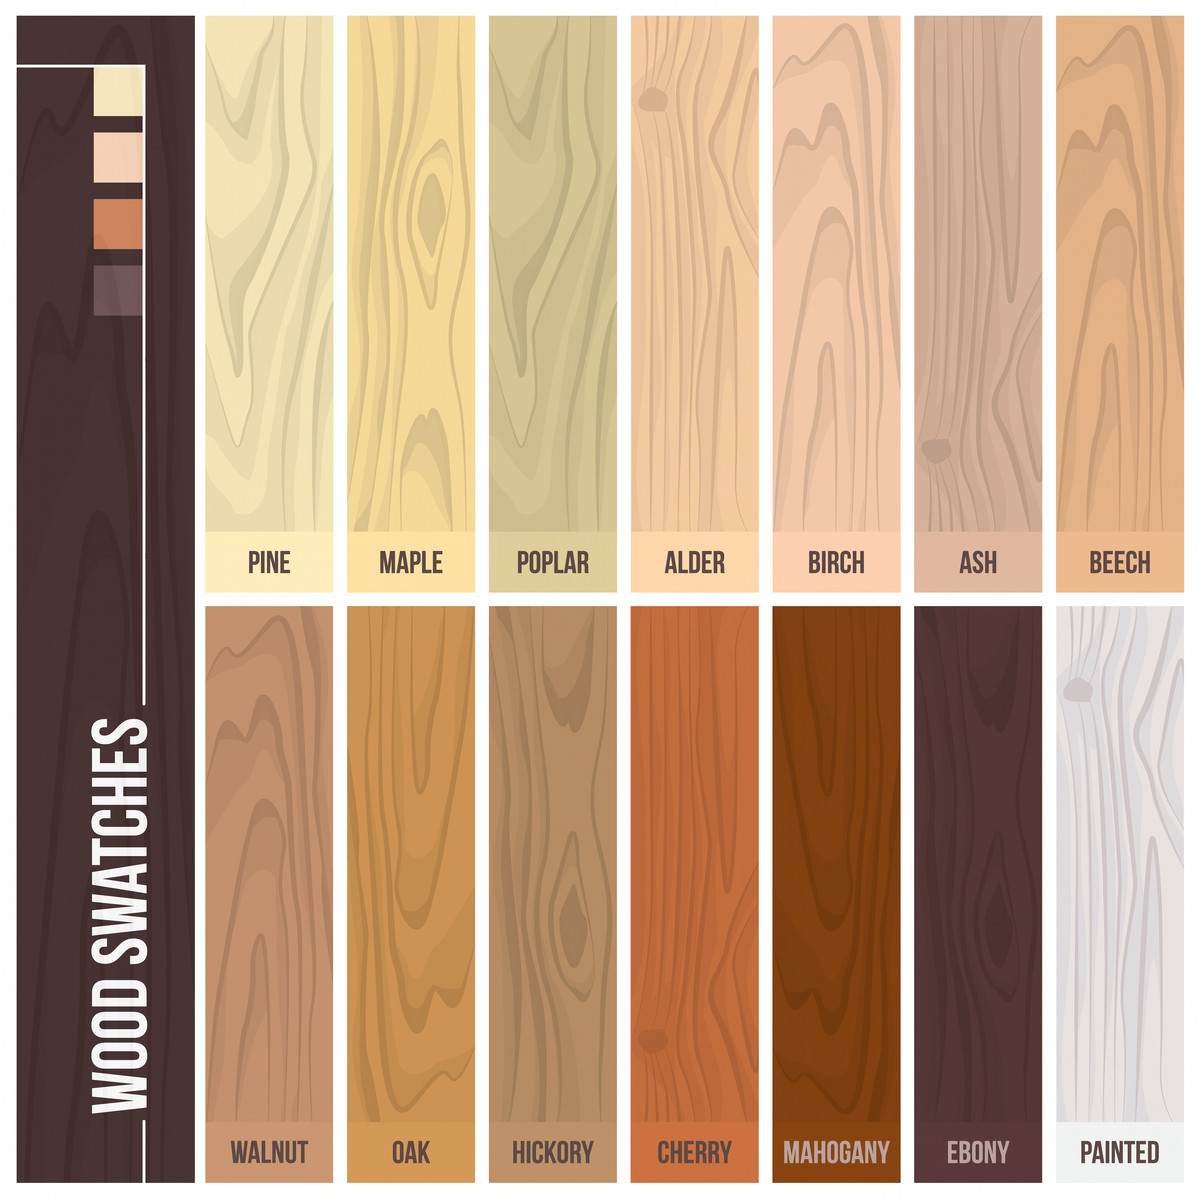 15 Fashionable Cost to Lay Hardwood Floor 2024 free download cost to lay hardwood floor of 12 types of hardwood flooring species styles edging dimensions in types of hardwood flooring illustrated guide